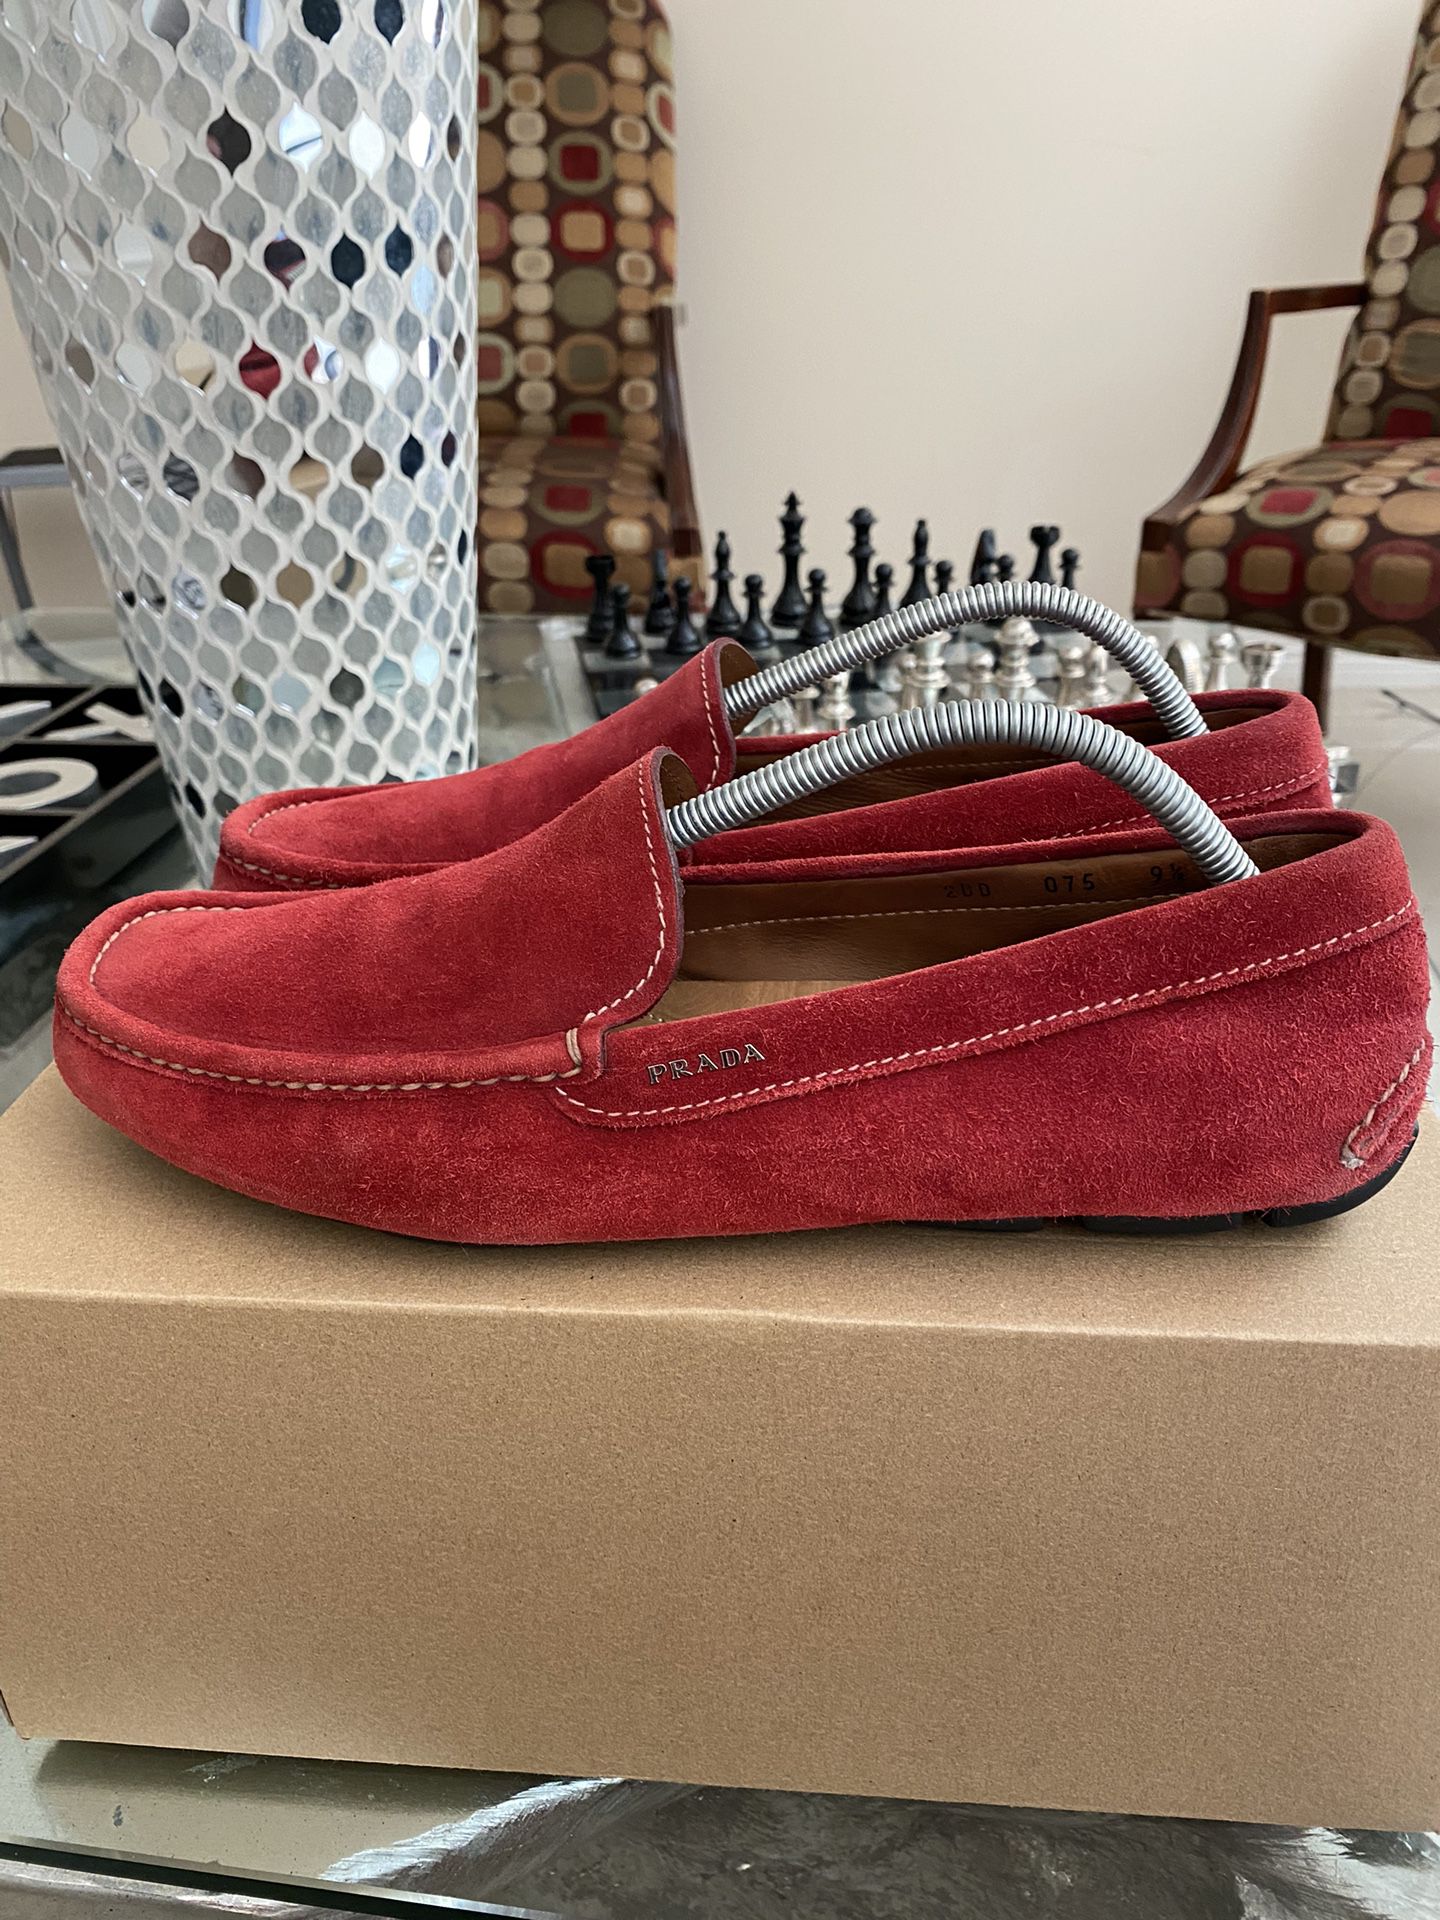 Loafers for Sale Mcallen, - OfferUp